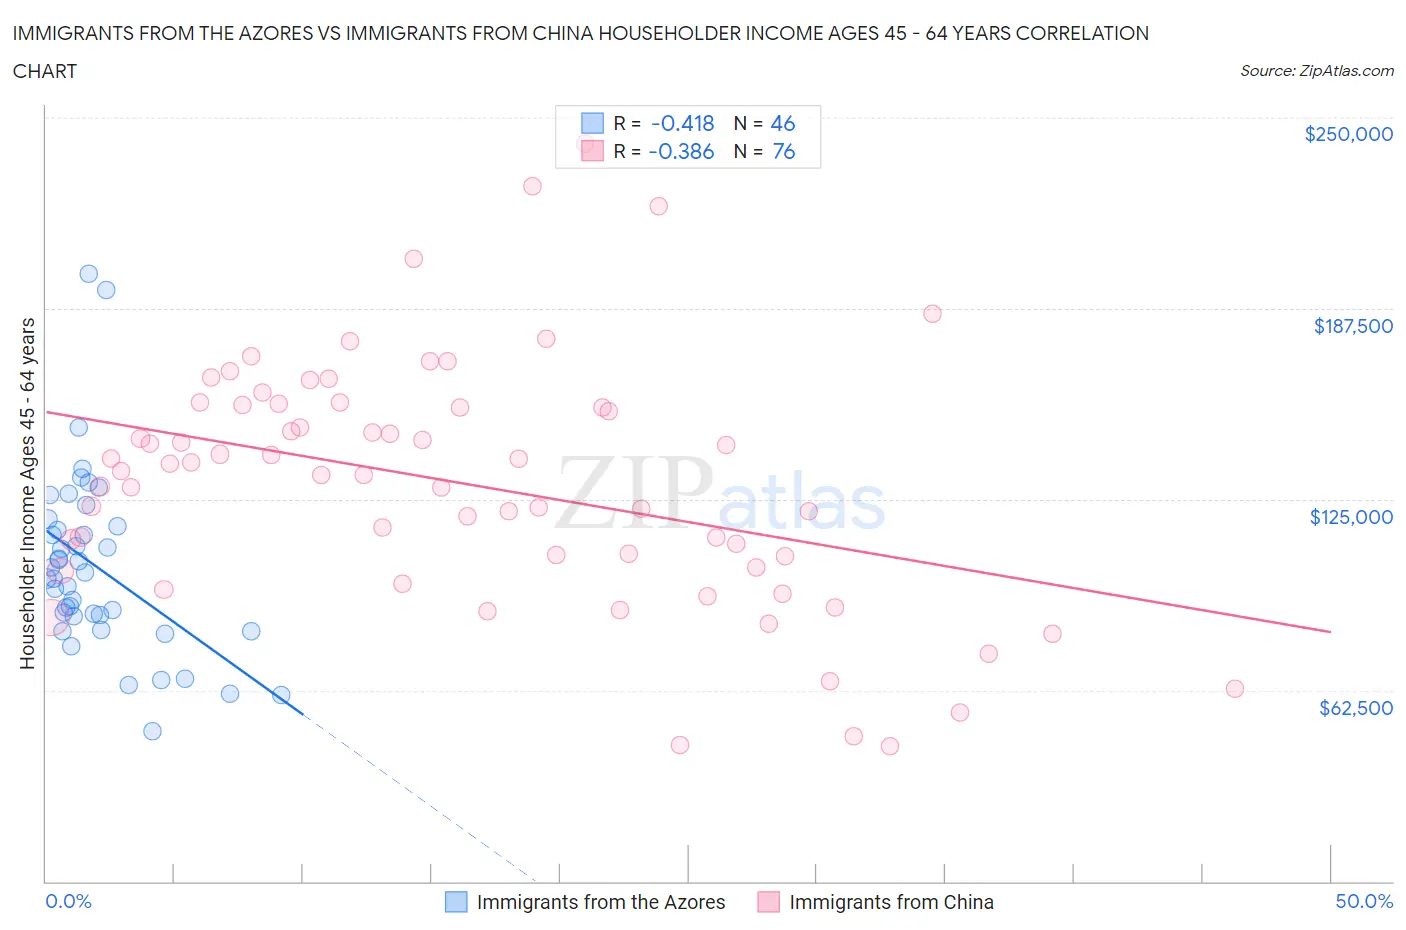 Immigrants from the Azores vs Immigrants from China Householder Income Ages 45 - 64 years